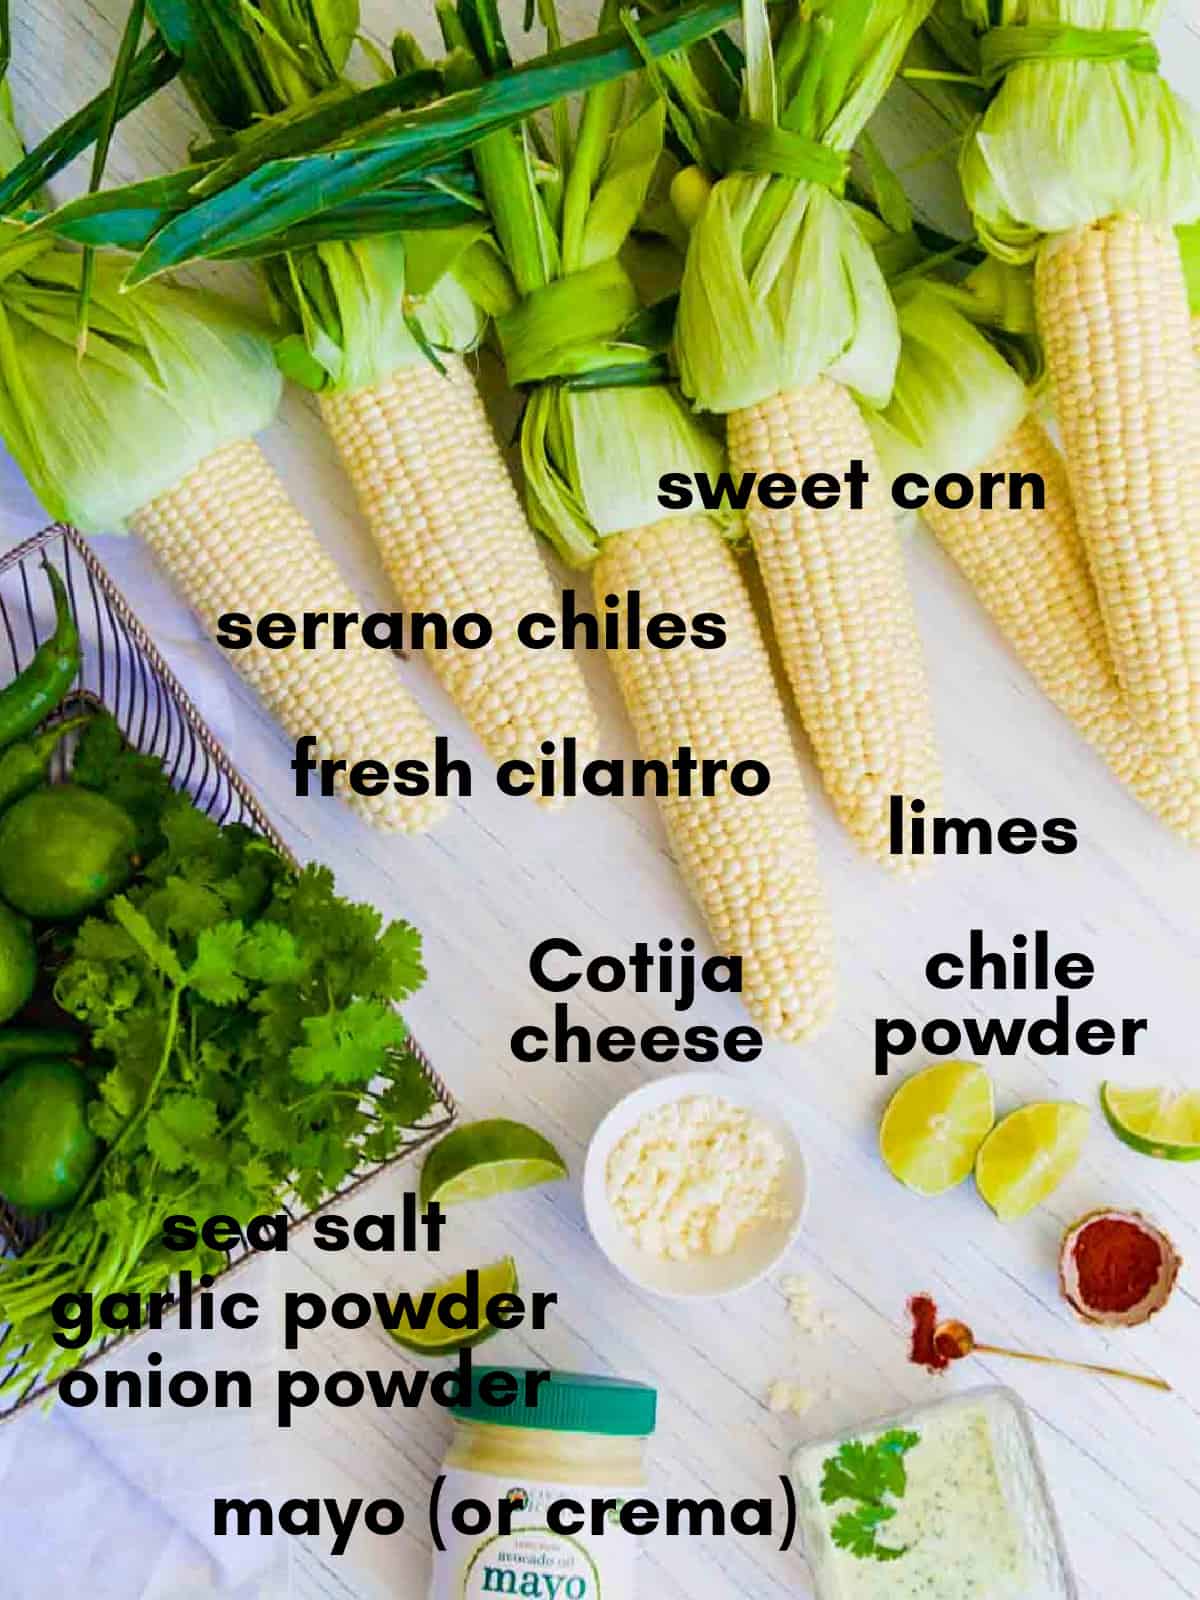 All the ingredients for authentic elotes Mexican street corn on a table all labeled.